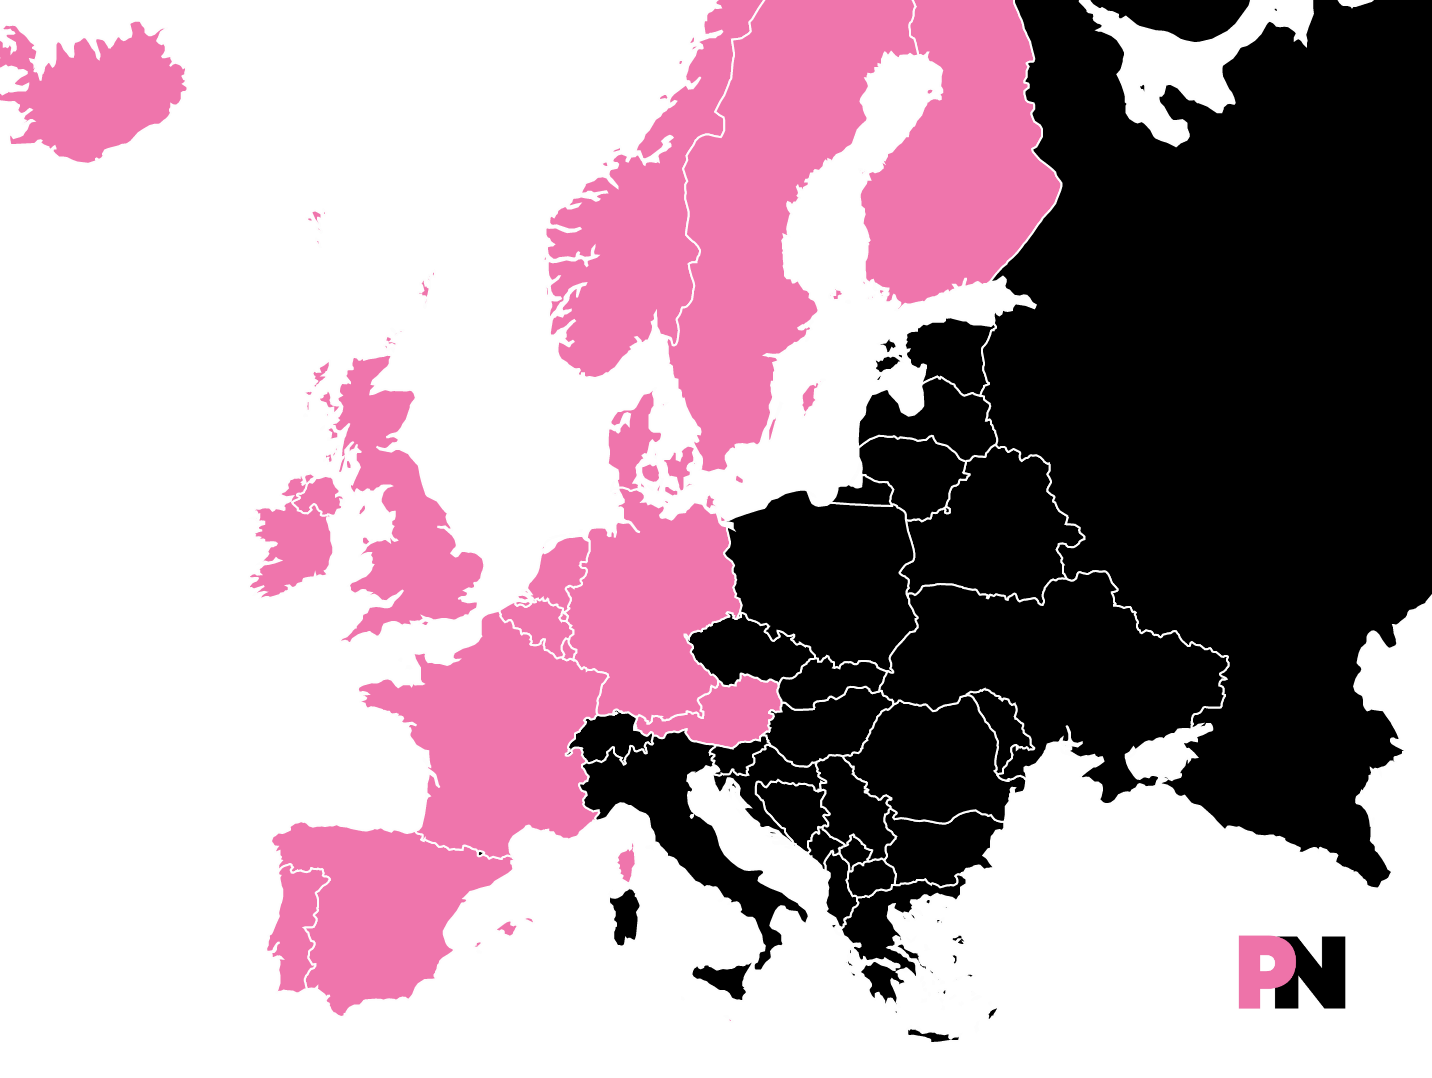 There is a stark divide in Europe on LGBT+ rights